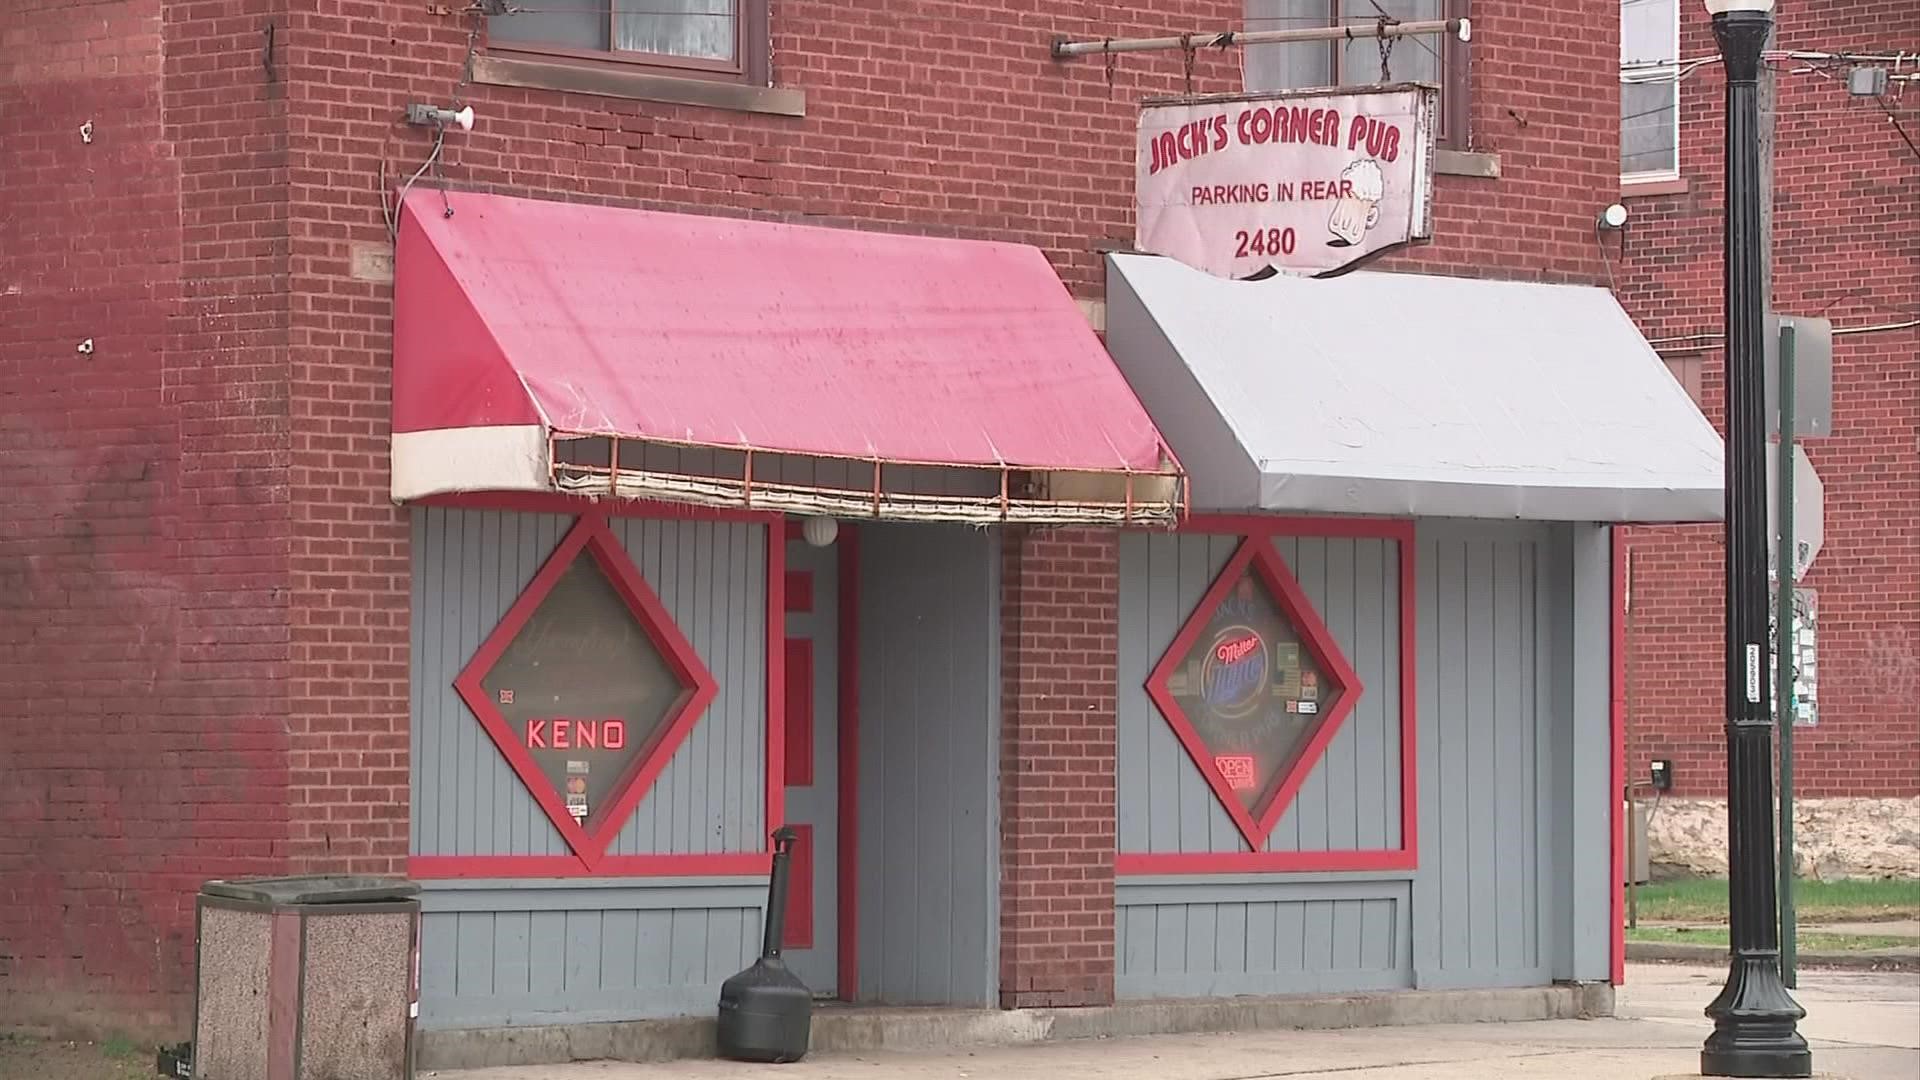 Nearly 800 residents have signed a petition to shut down the South Hudson neighborhood bar.